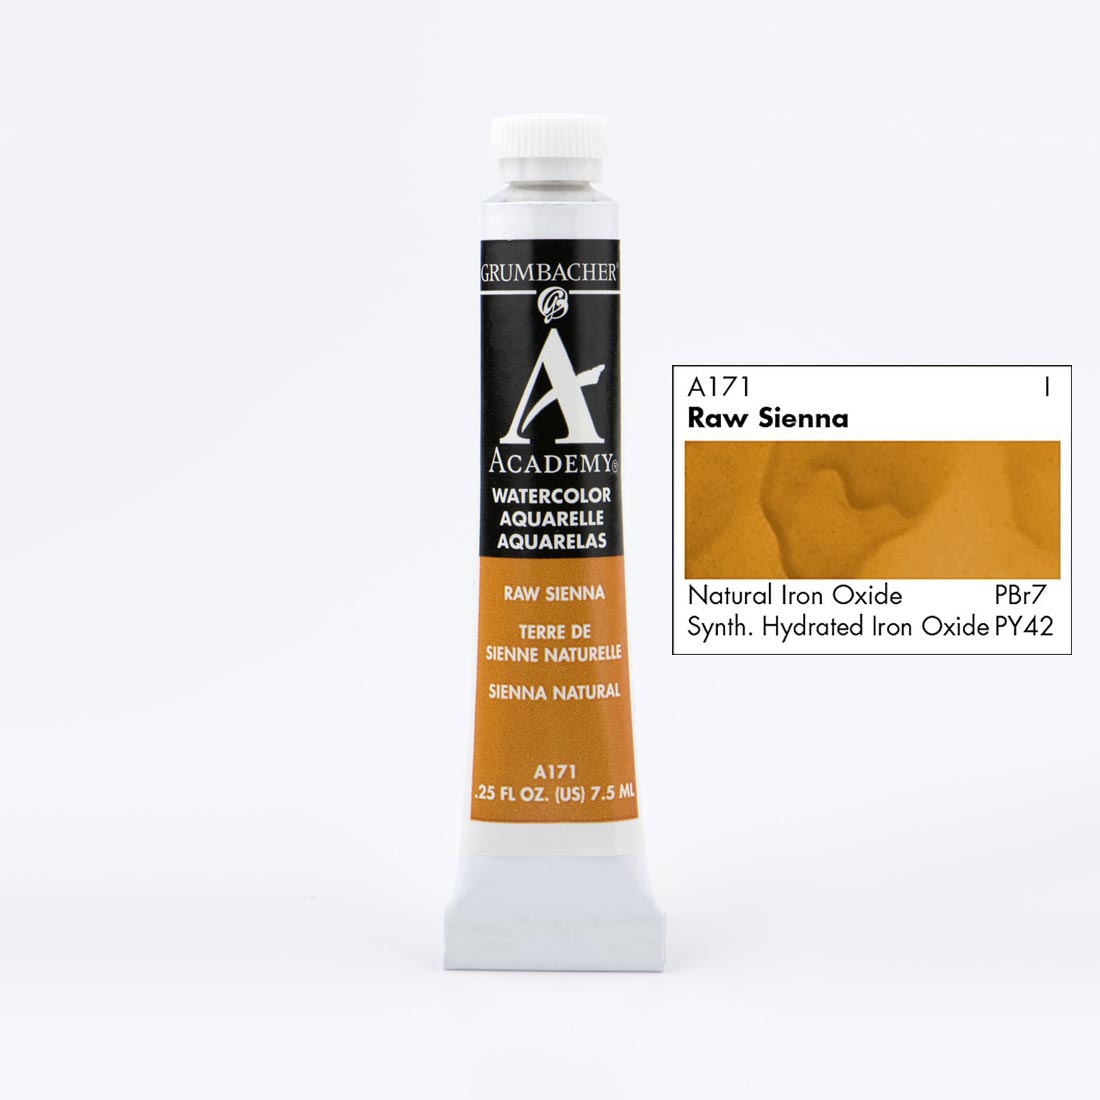 Tube of Grumbacher Academy Watercolor beside Raw Sienna color swatch